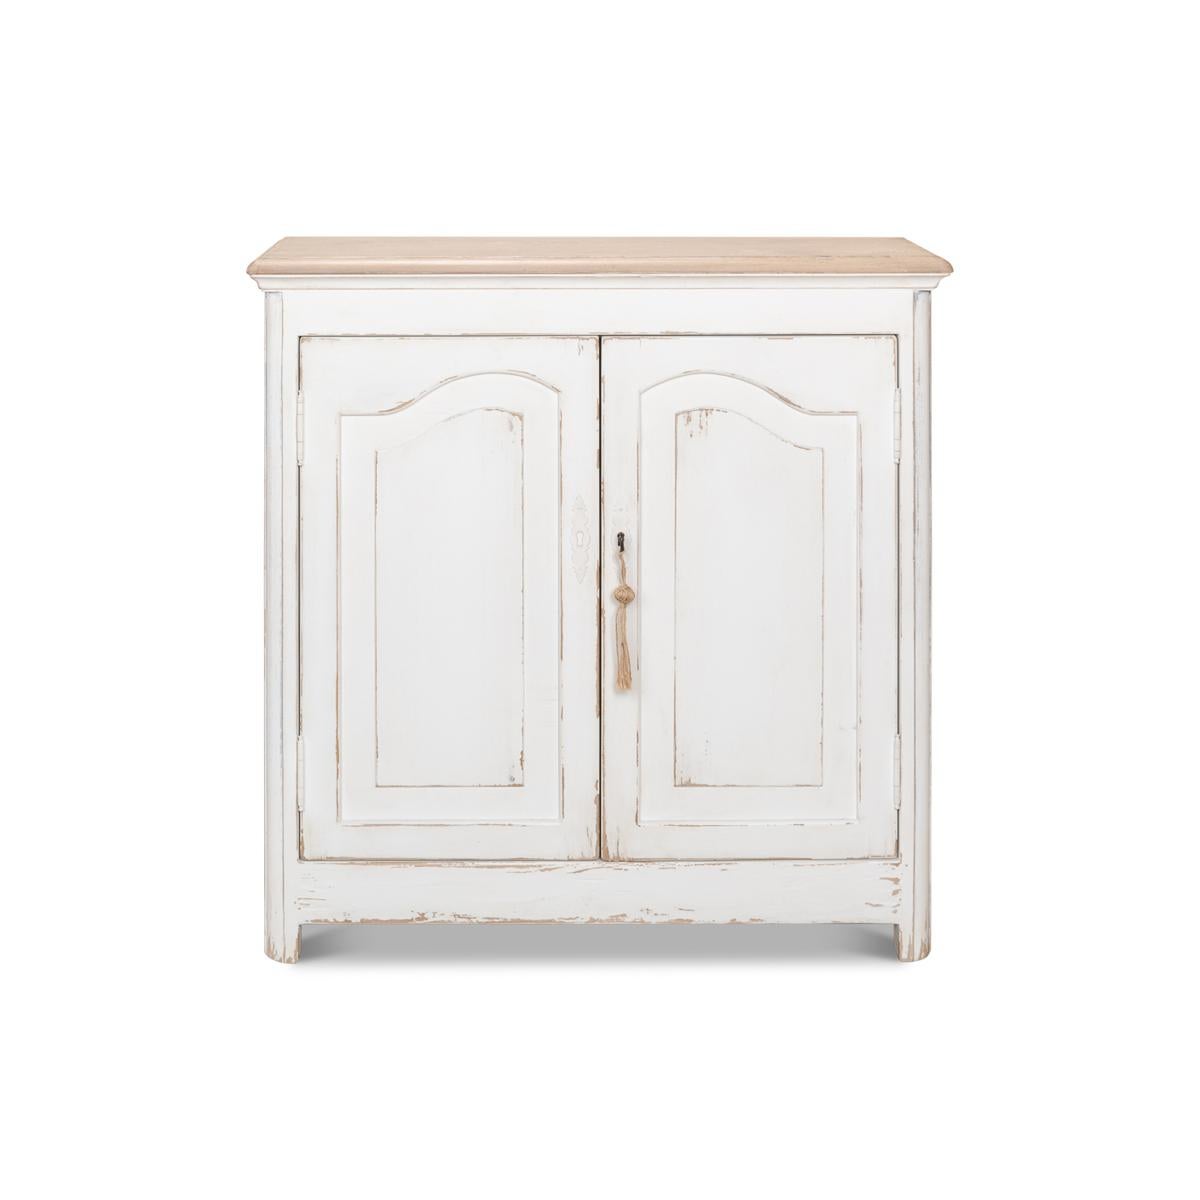 Made of solid pine with a natural finish molded edge rectangular top, a distressed antique white cabinet with panel doors and sides. The two doors open to reveal a sky-blue painted interior. 

Dimensions: 35